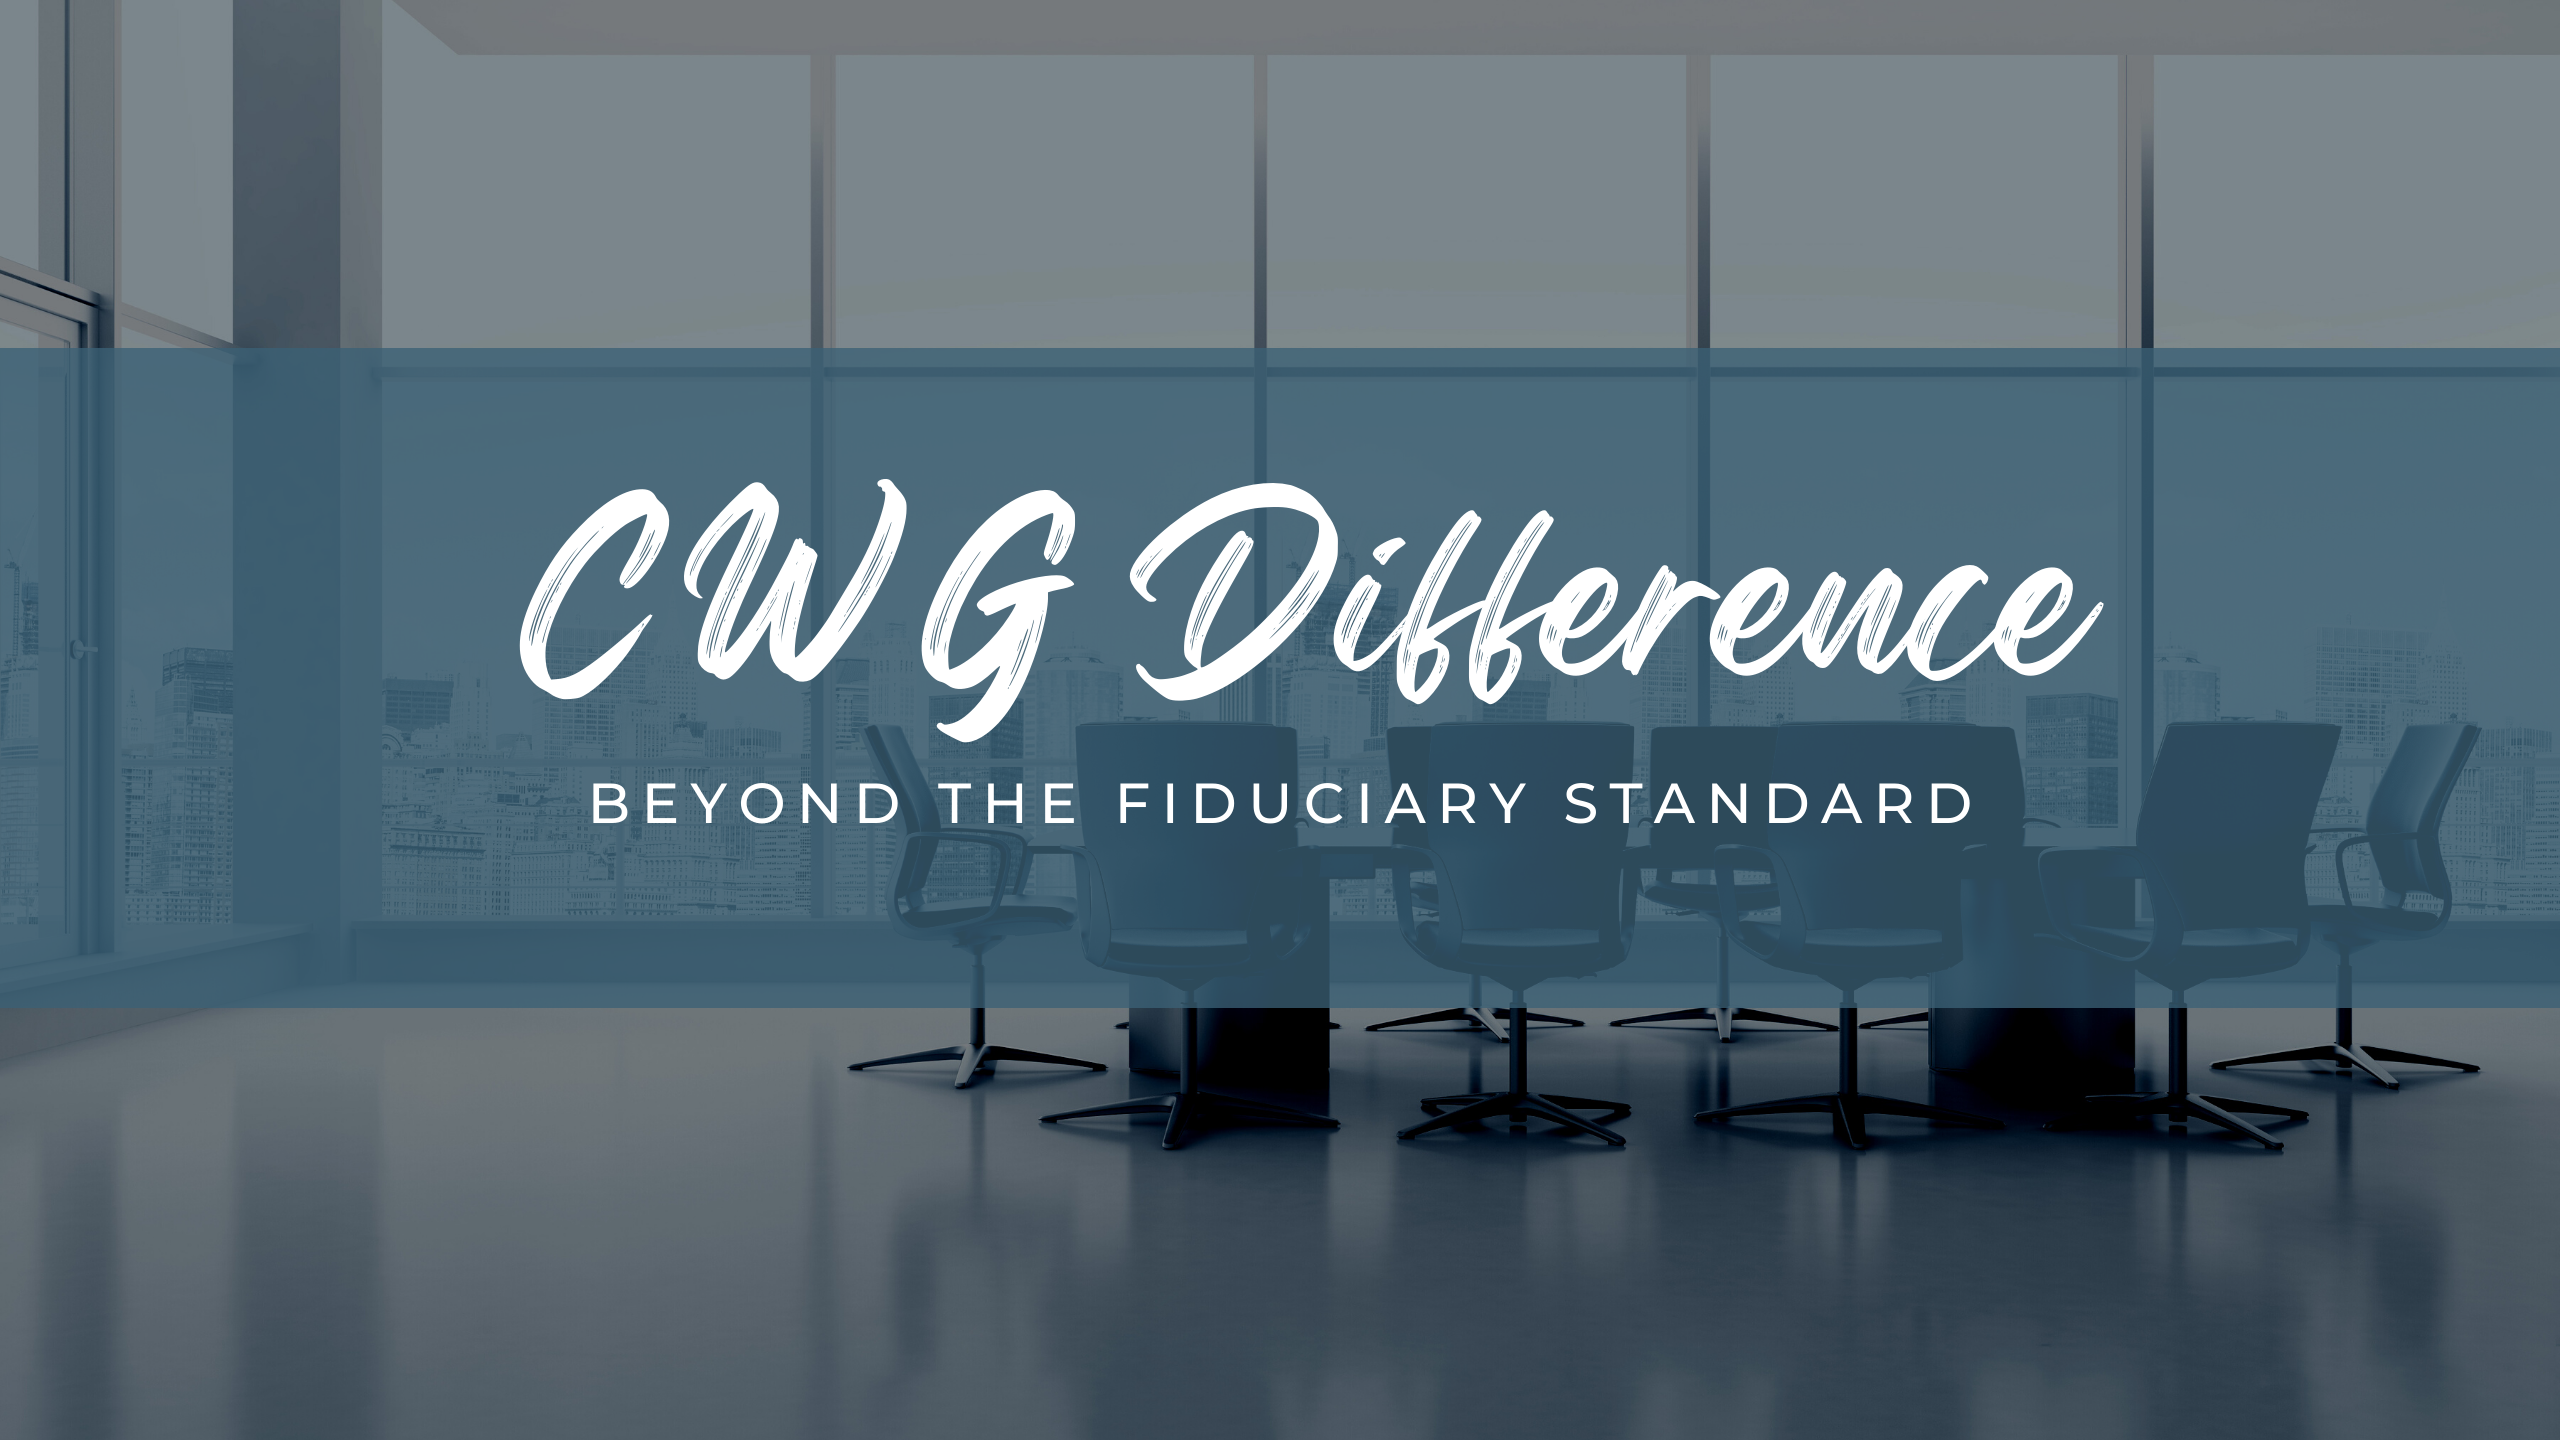 The CWG Difference - More than a Fiduciary